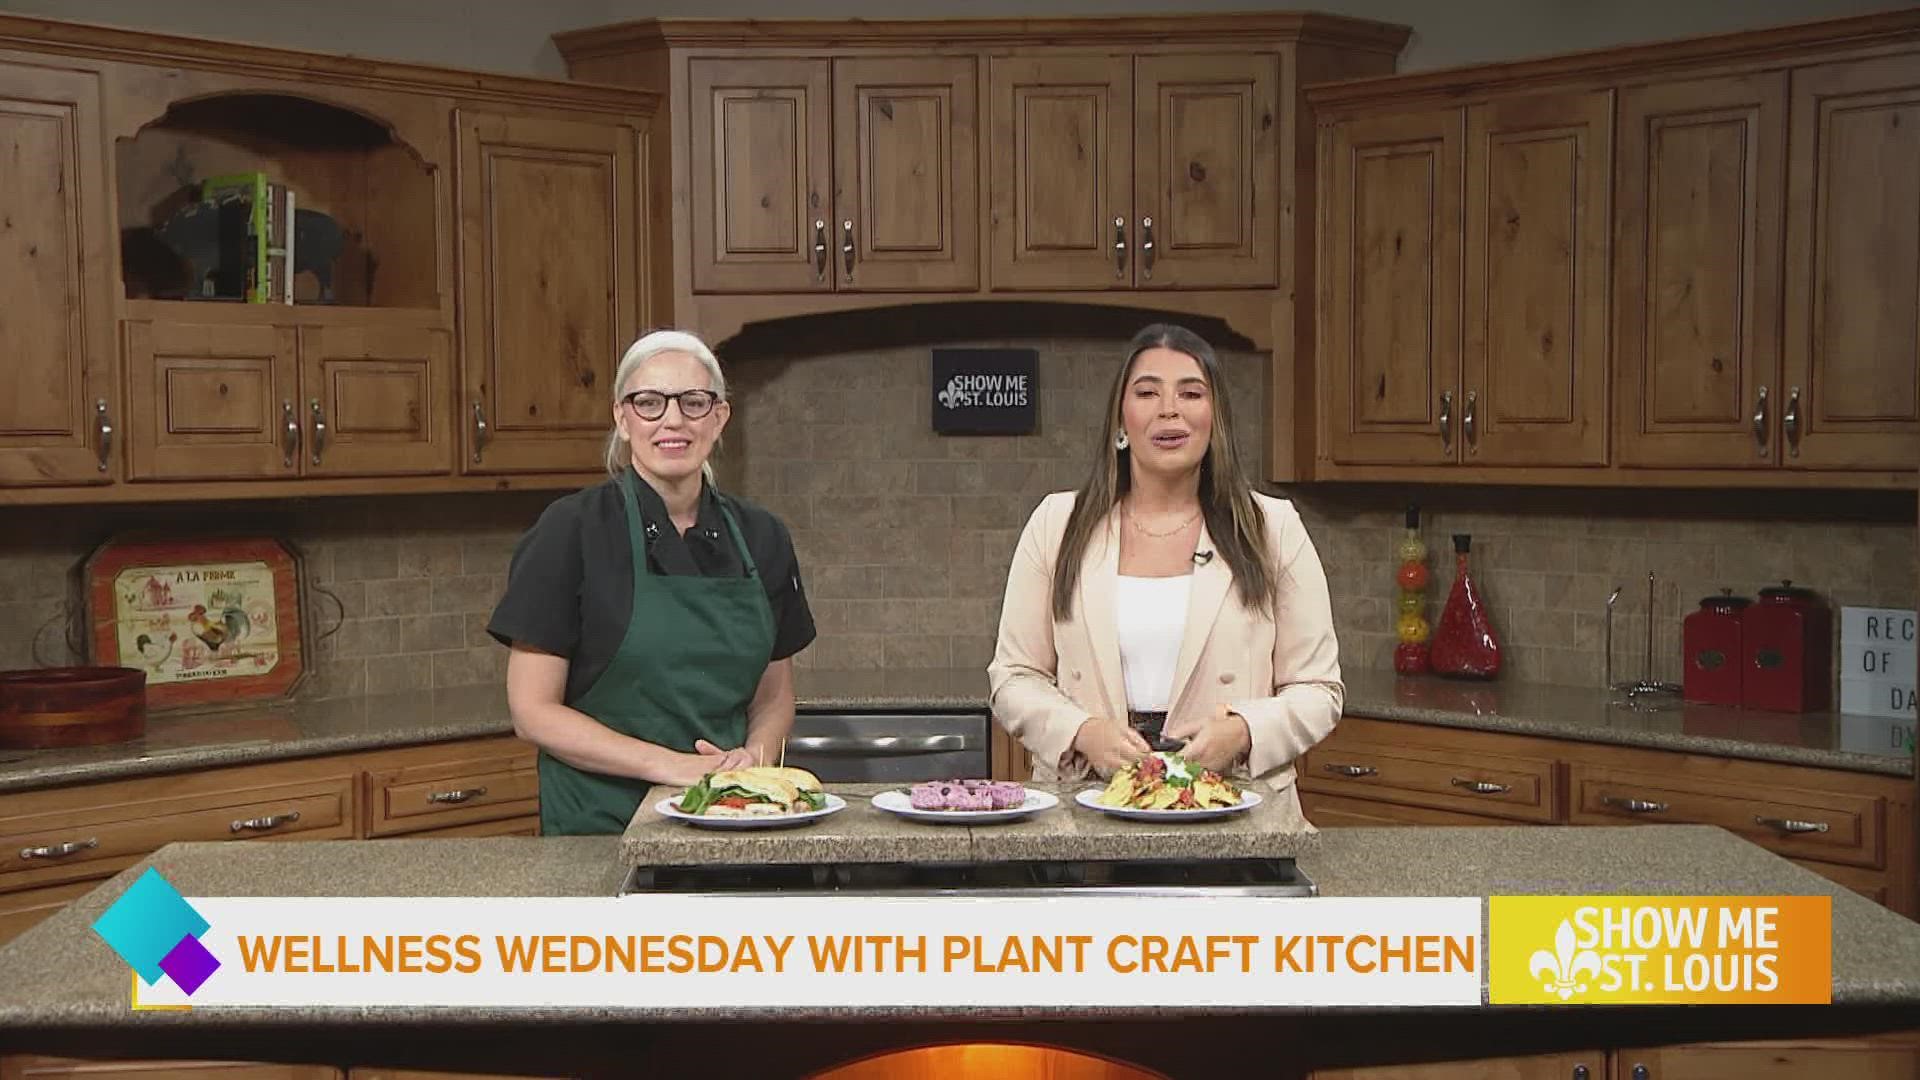 Rachel Carr started Plant Craft Kitchen as a meal delivery service in 2020. Her brick and mortar location is now open in Sunset Hills.